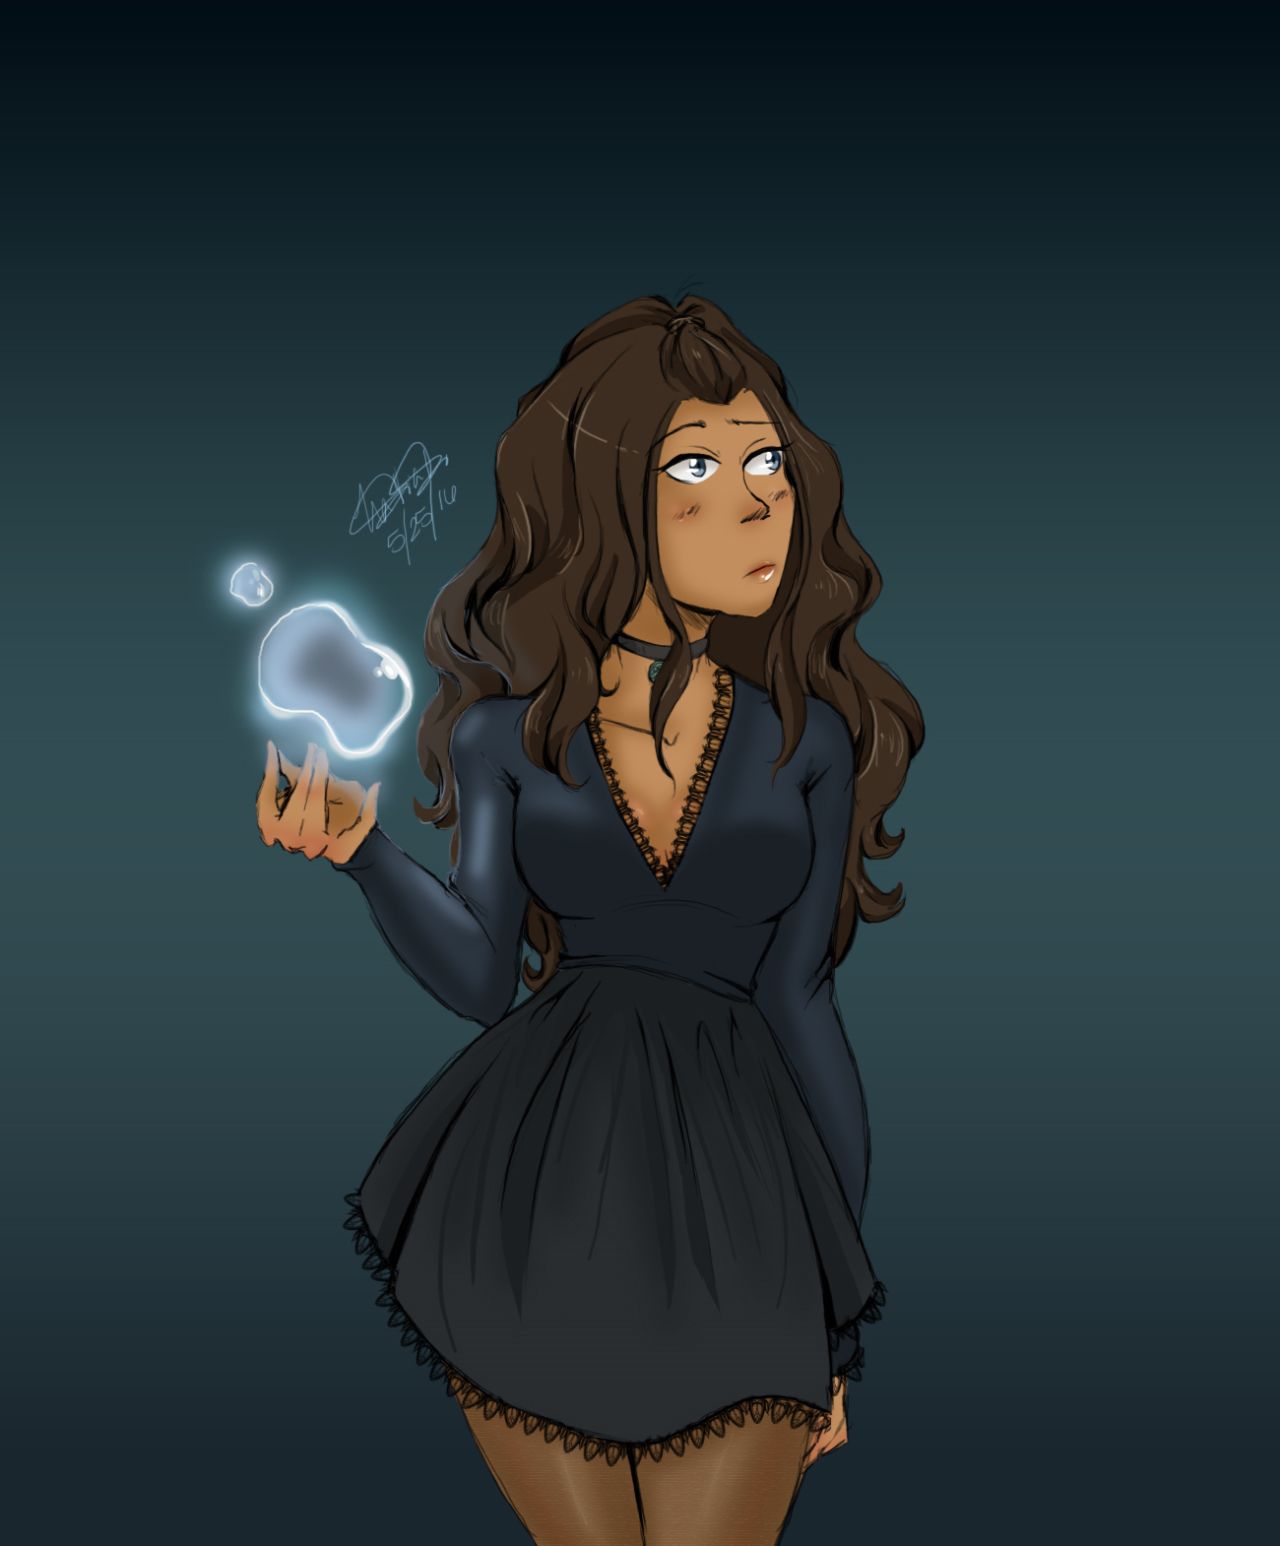 Katara the Last Water Witch by goldenstringoffate on tumblr